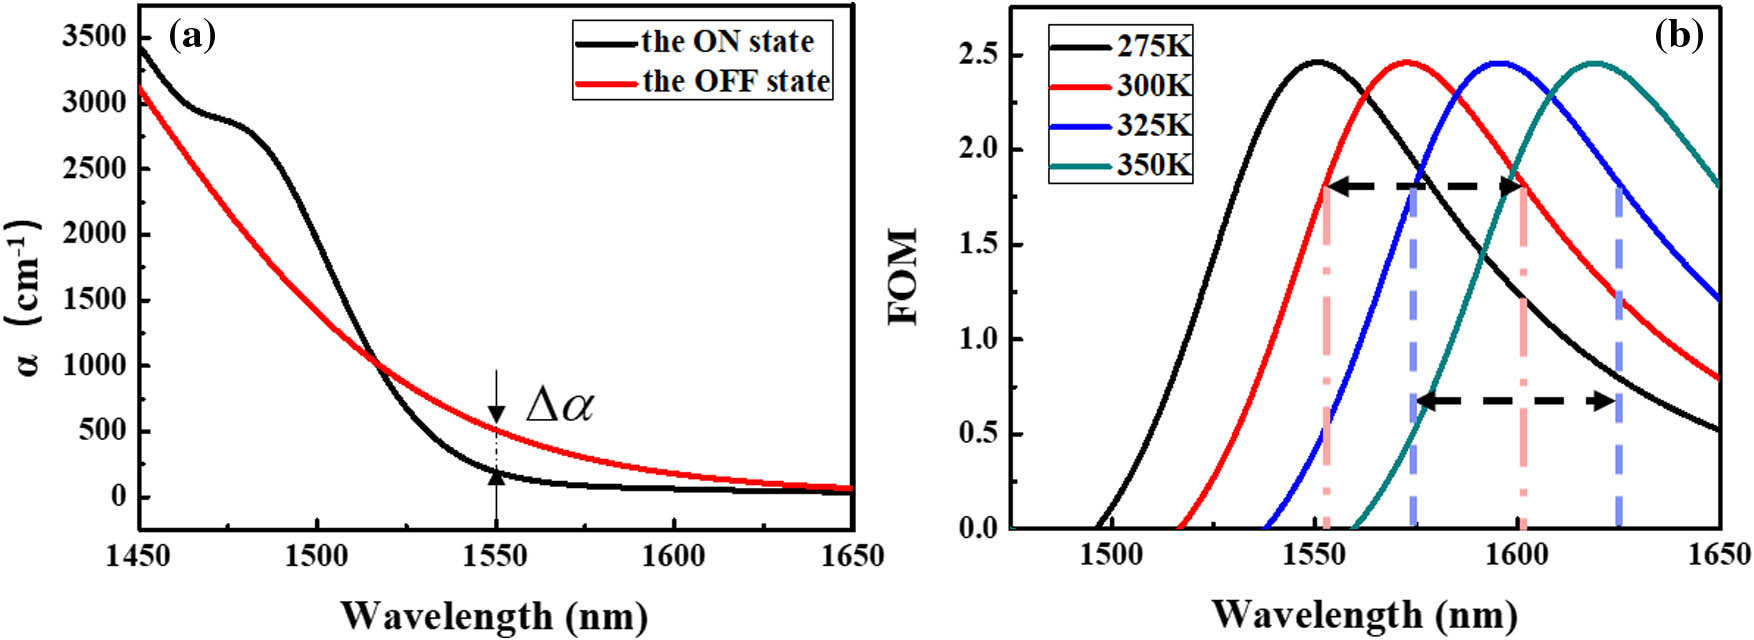 (a) Absorption coefficient lines of Ge0.992Si0.008 at ON and OFF states. (b) FOM variation with wavelength at different temperatures.